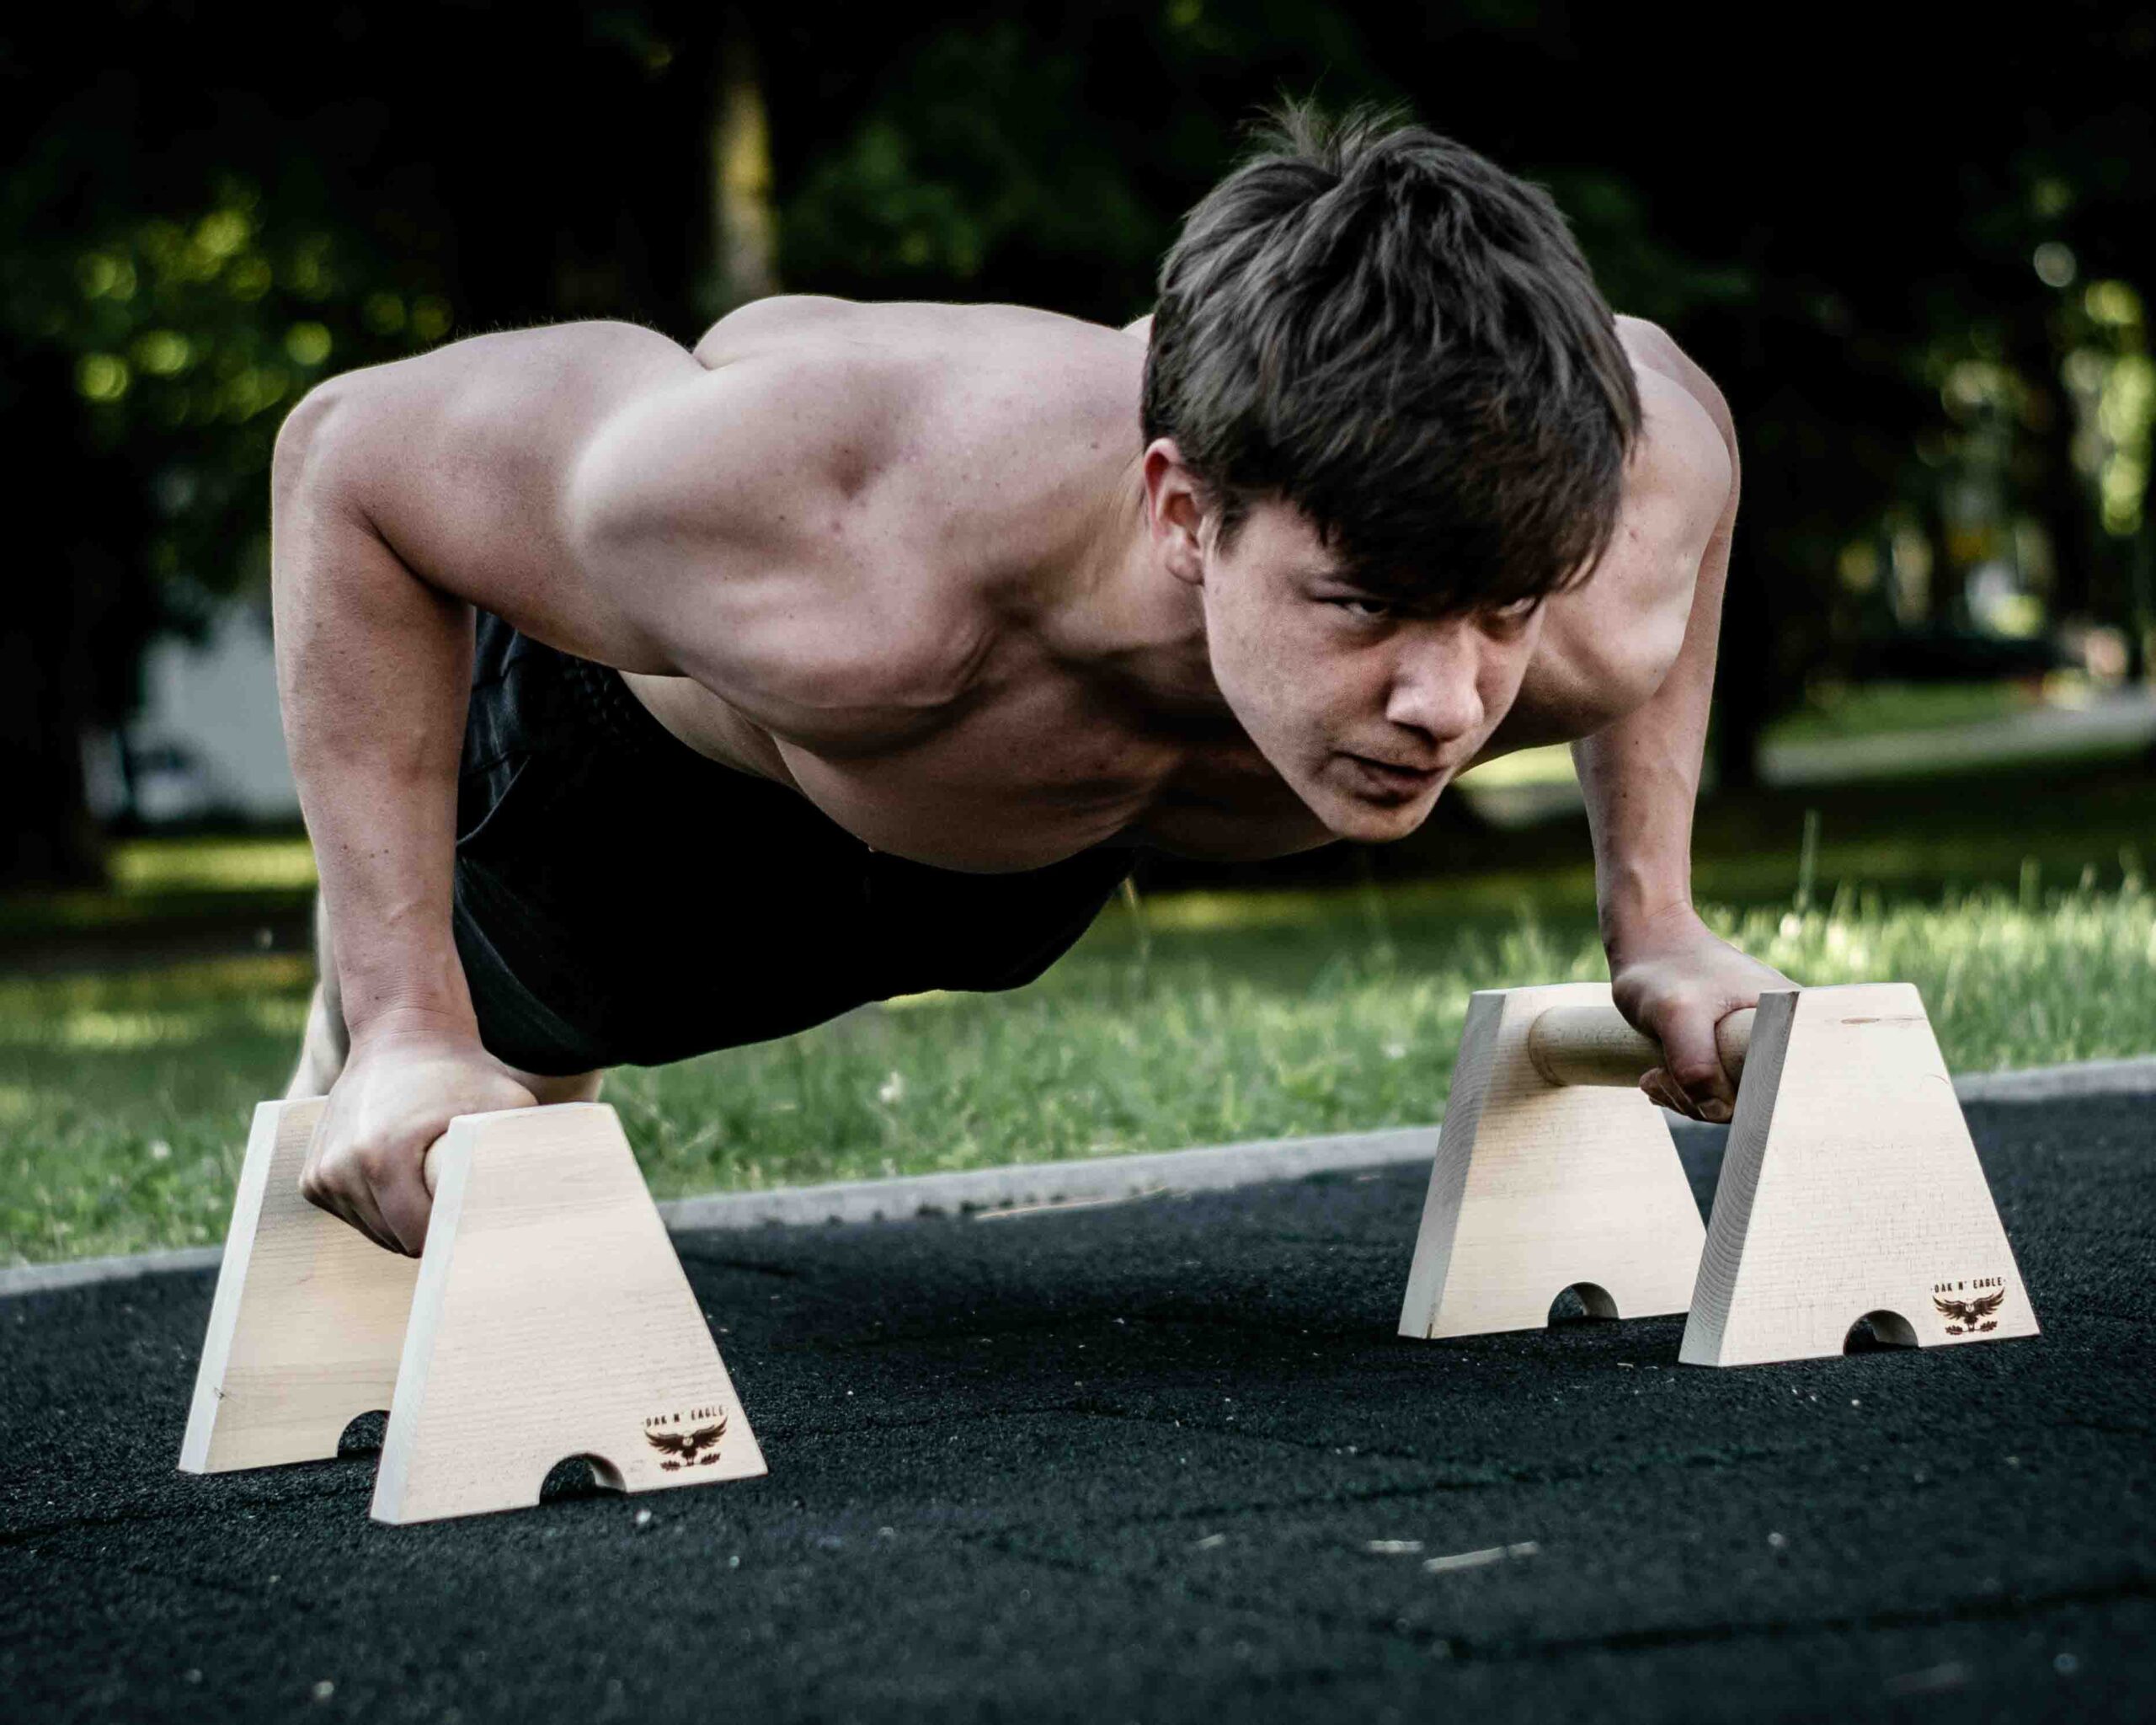 https://www.oakneagle.com/wp-content/uploads/2020/05/high-wooden-parallettes-pushup-oakneagle-scaled.jpg